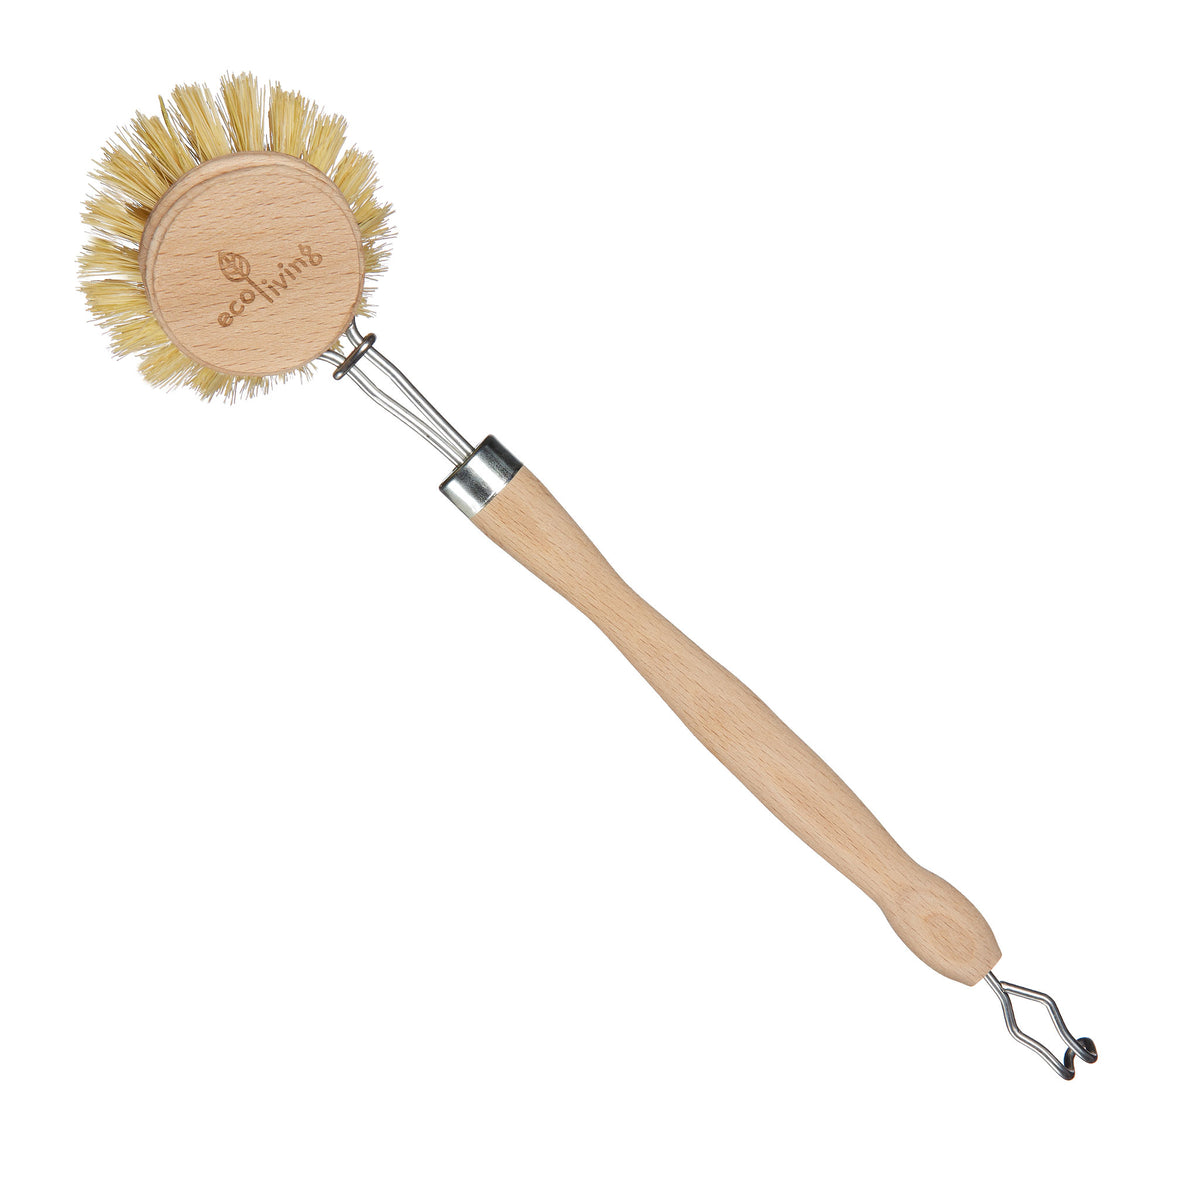 Wooden Washing Up Brush With Replaceable Head | Washing Up Brush - The Naughty Shrew